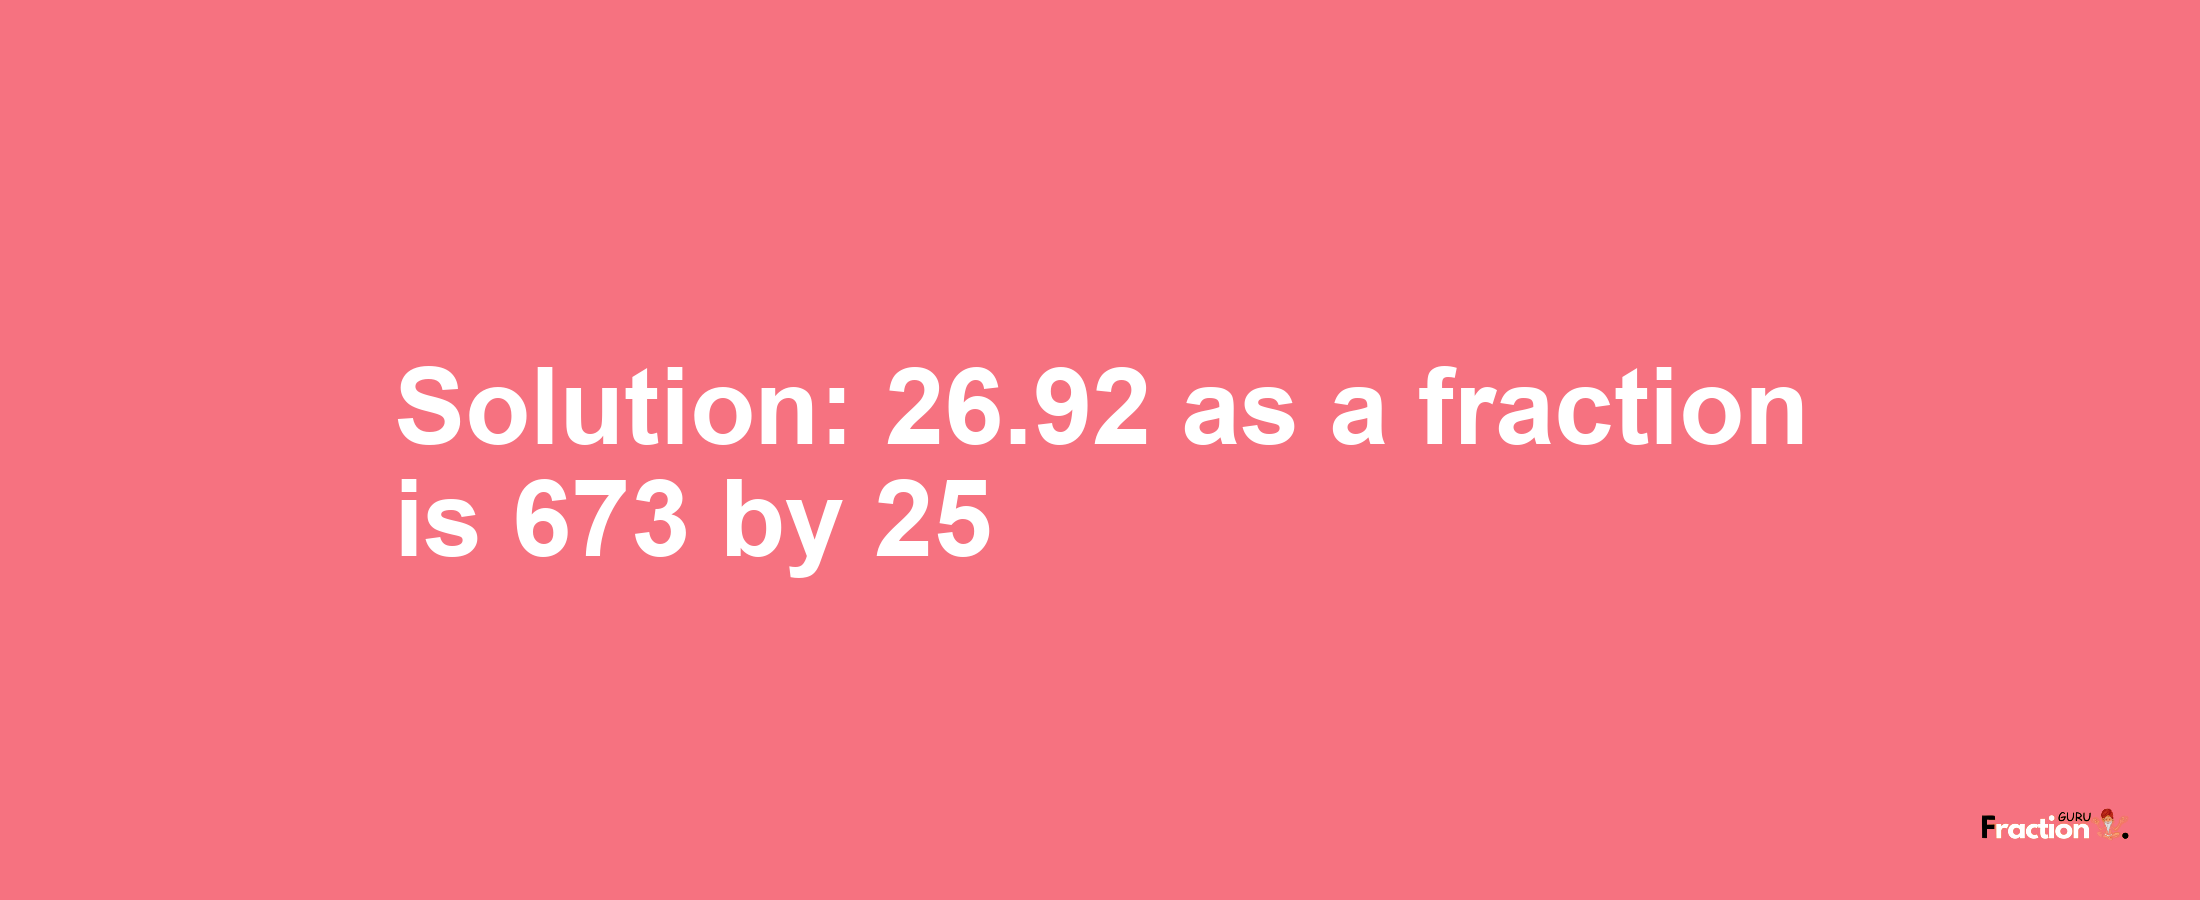 Solution:26.92 as a fraction is 673/25